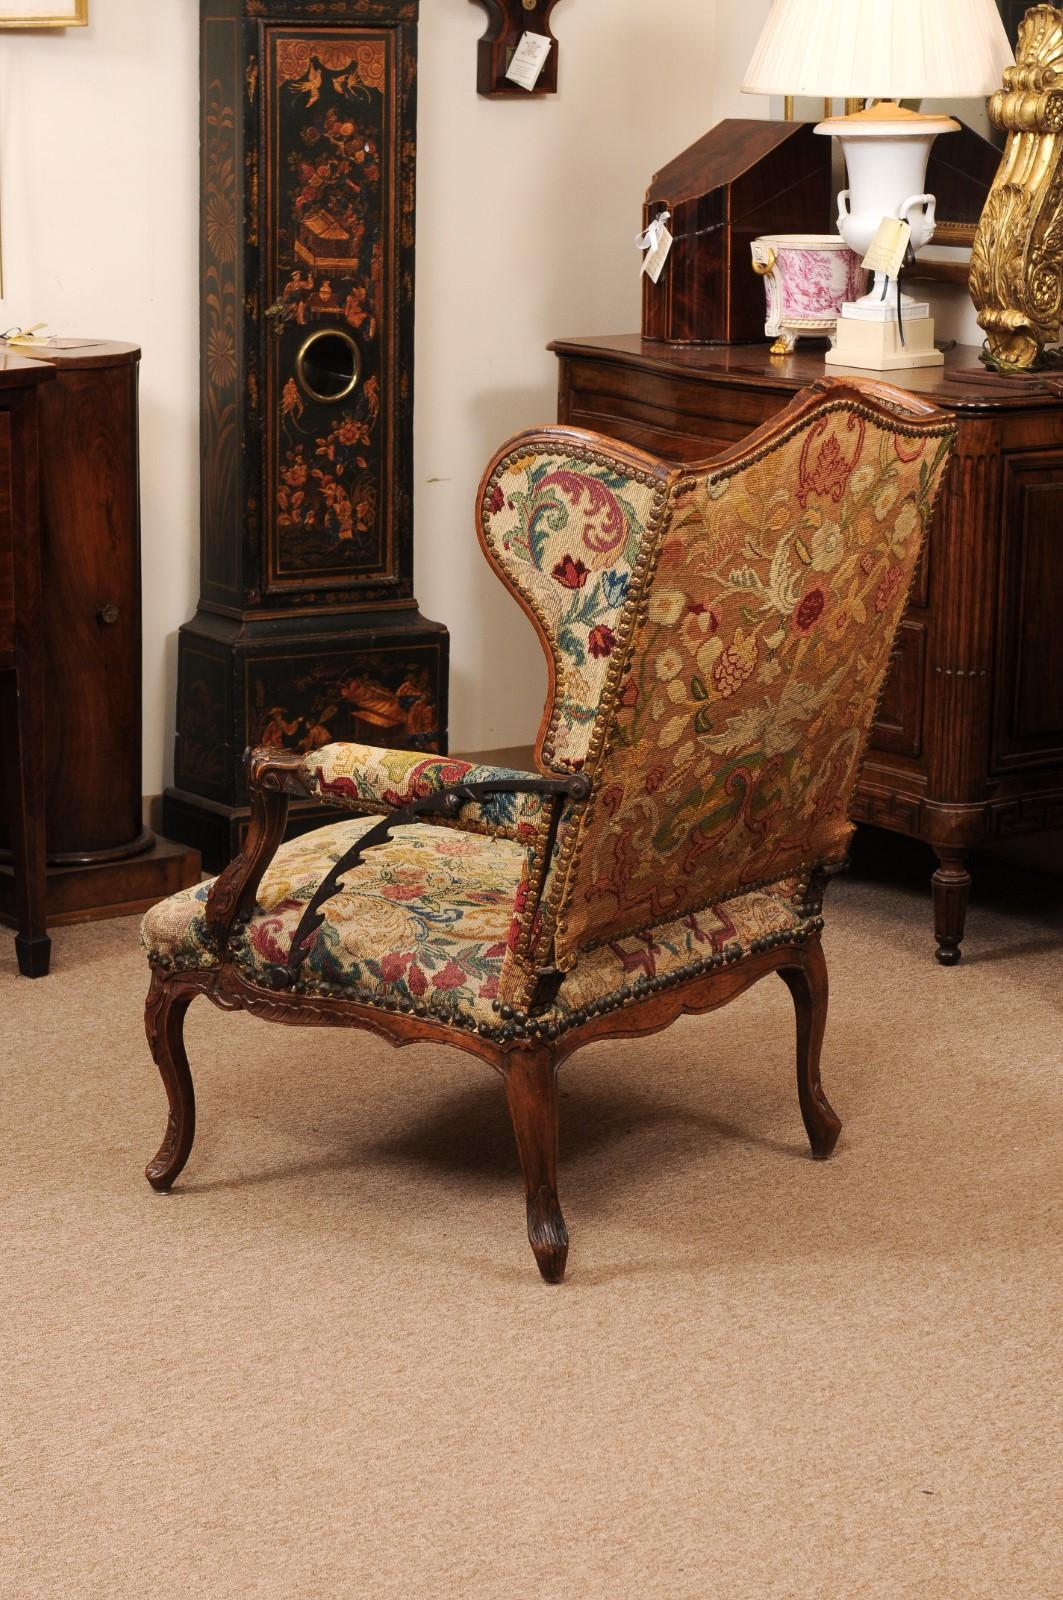 Early 18th Century French Regence Period Walnut Ratchet Wing Chair with Needlewo For Sale 6